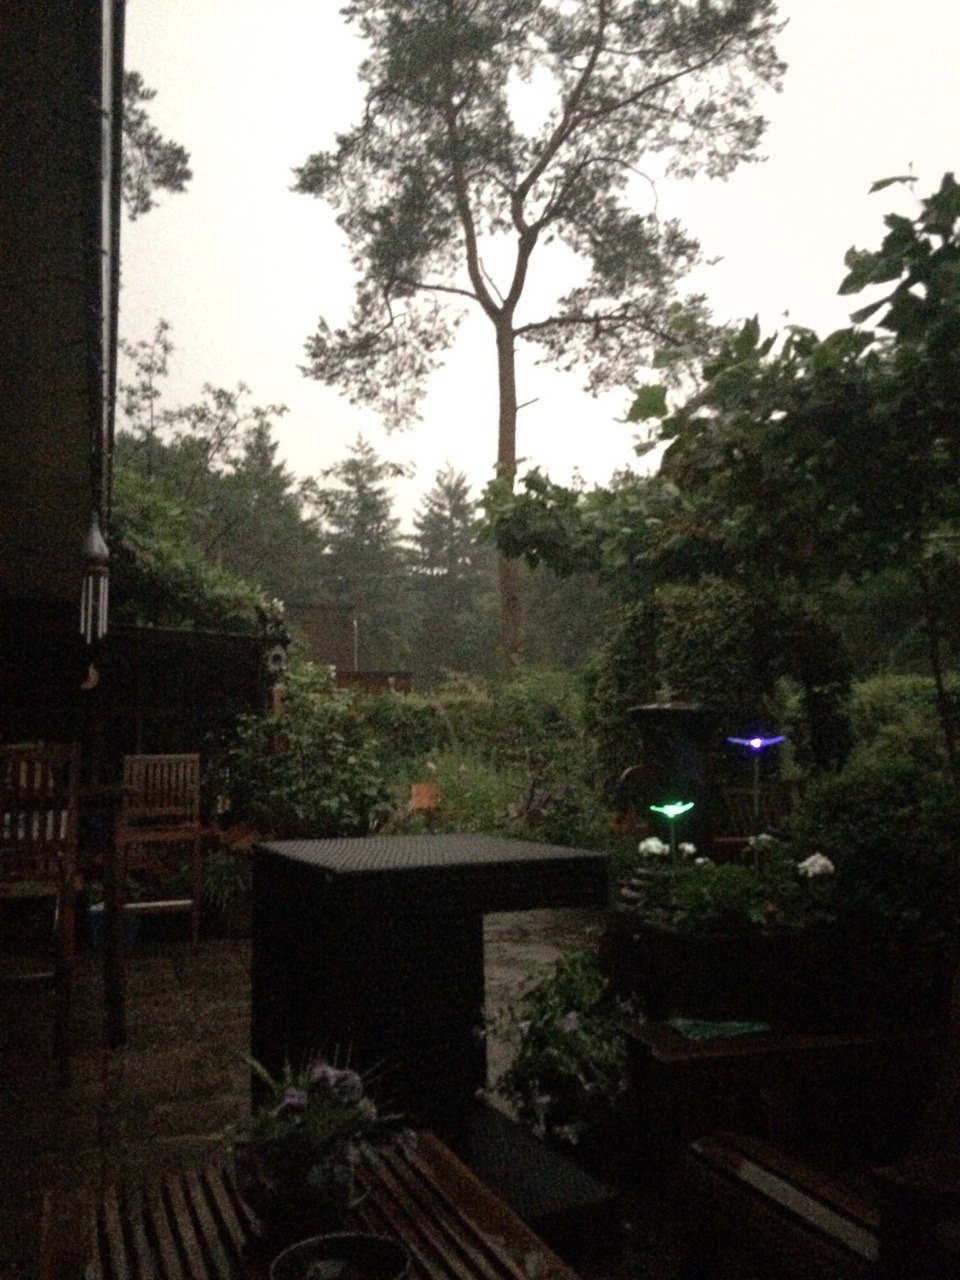 venus-luna:  I managed to take a picture during a lightning strike tonight! It was